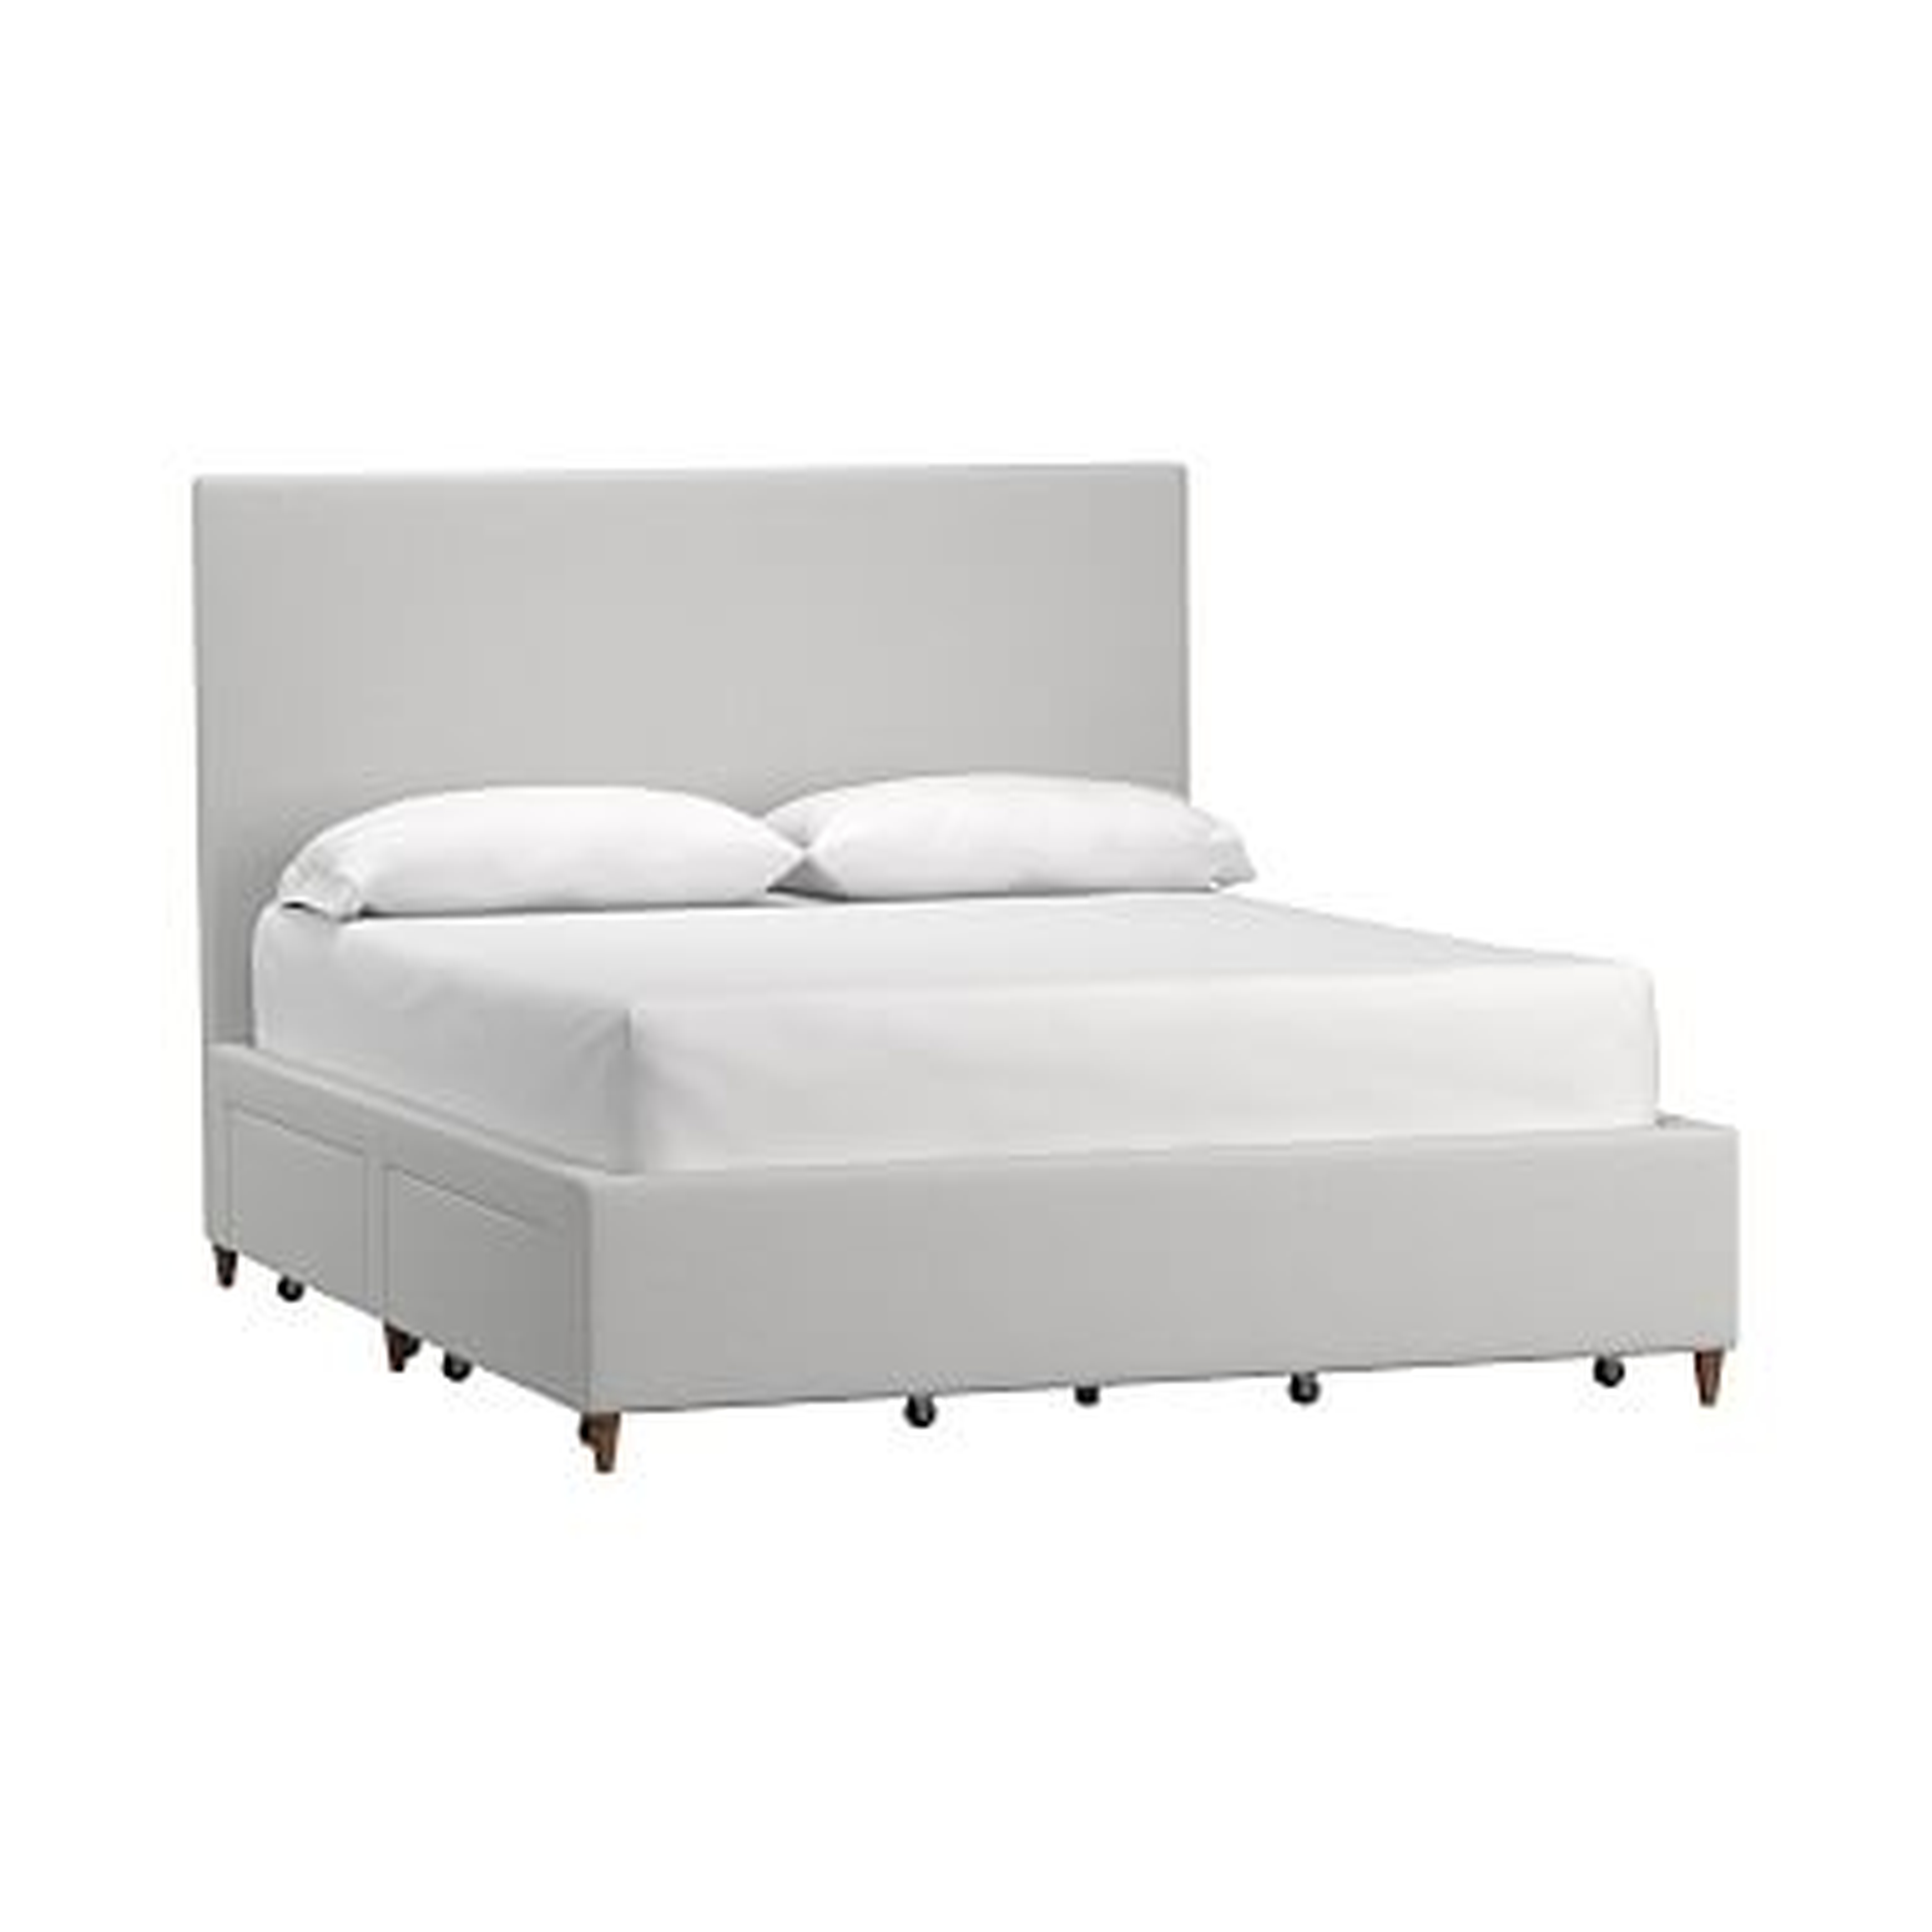 Beale Upholstered Storage Bed, Queen, Brushed Crossweave Light Gray - Pottery Barn Teen